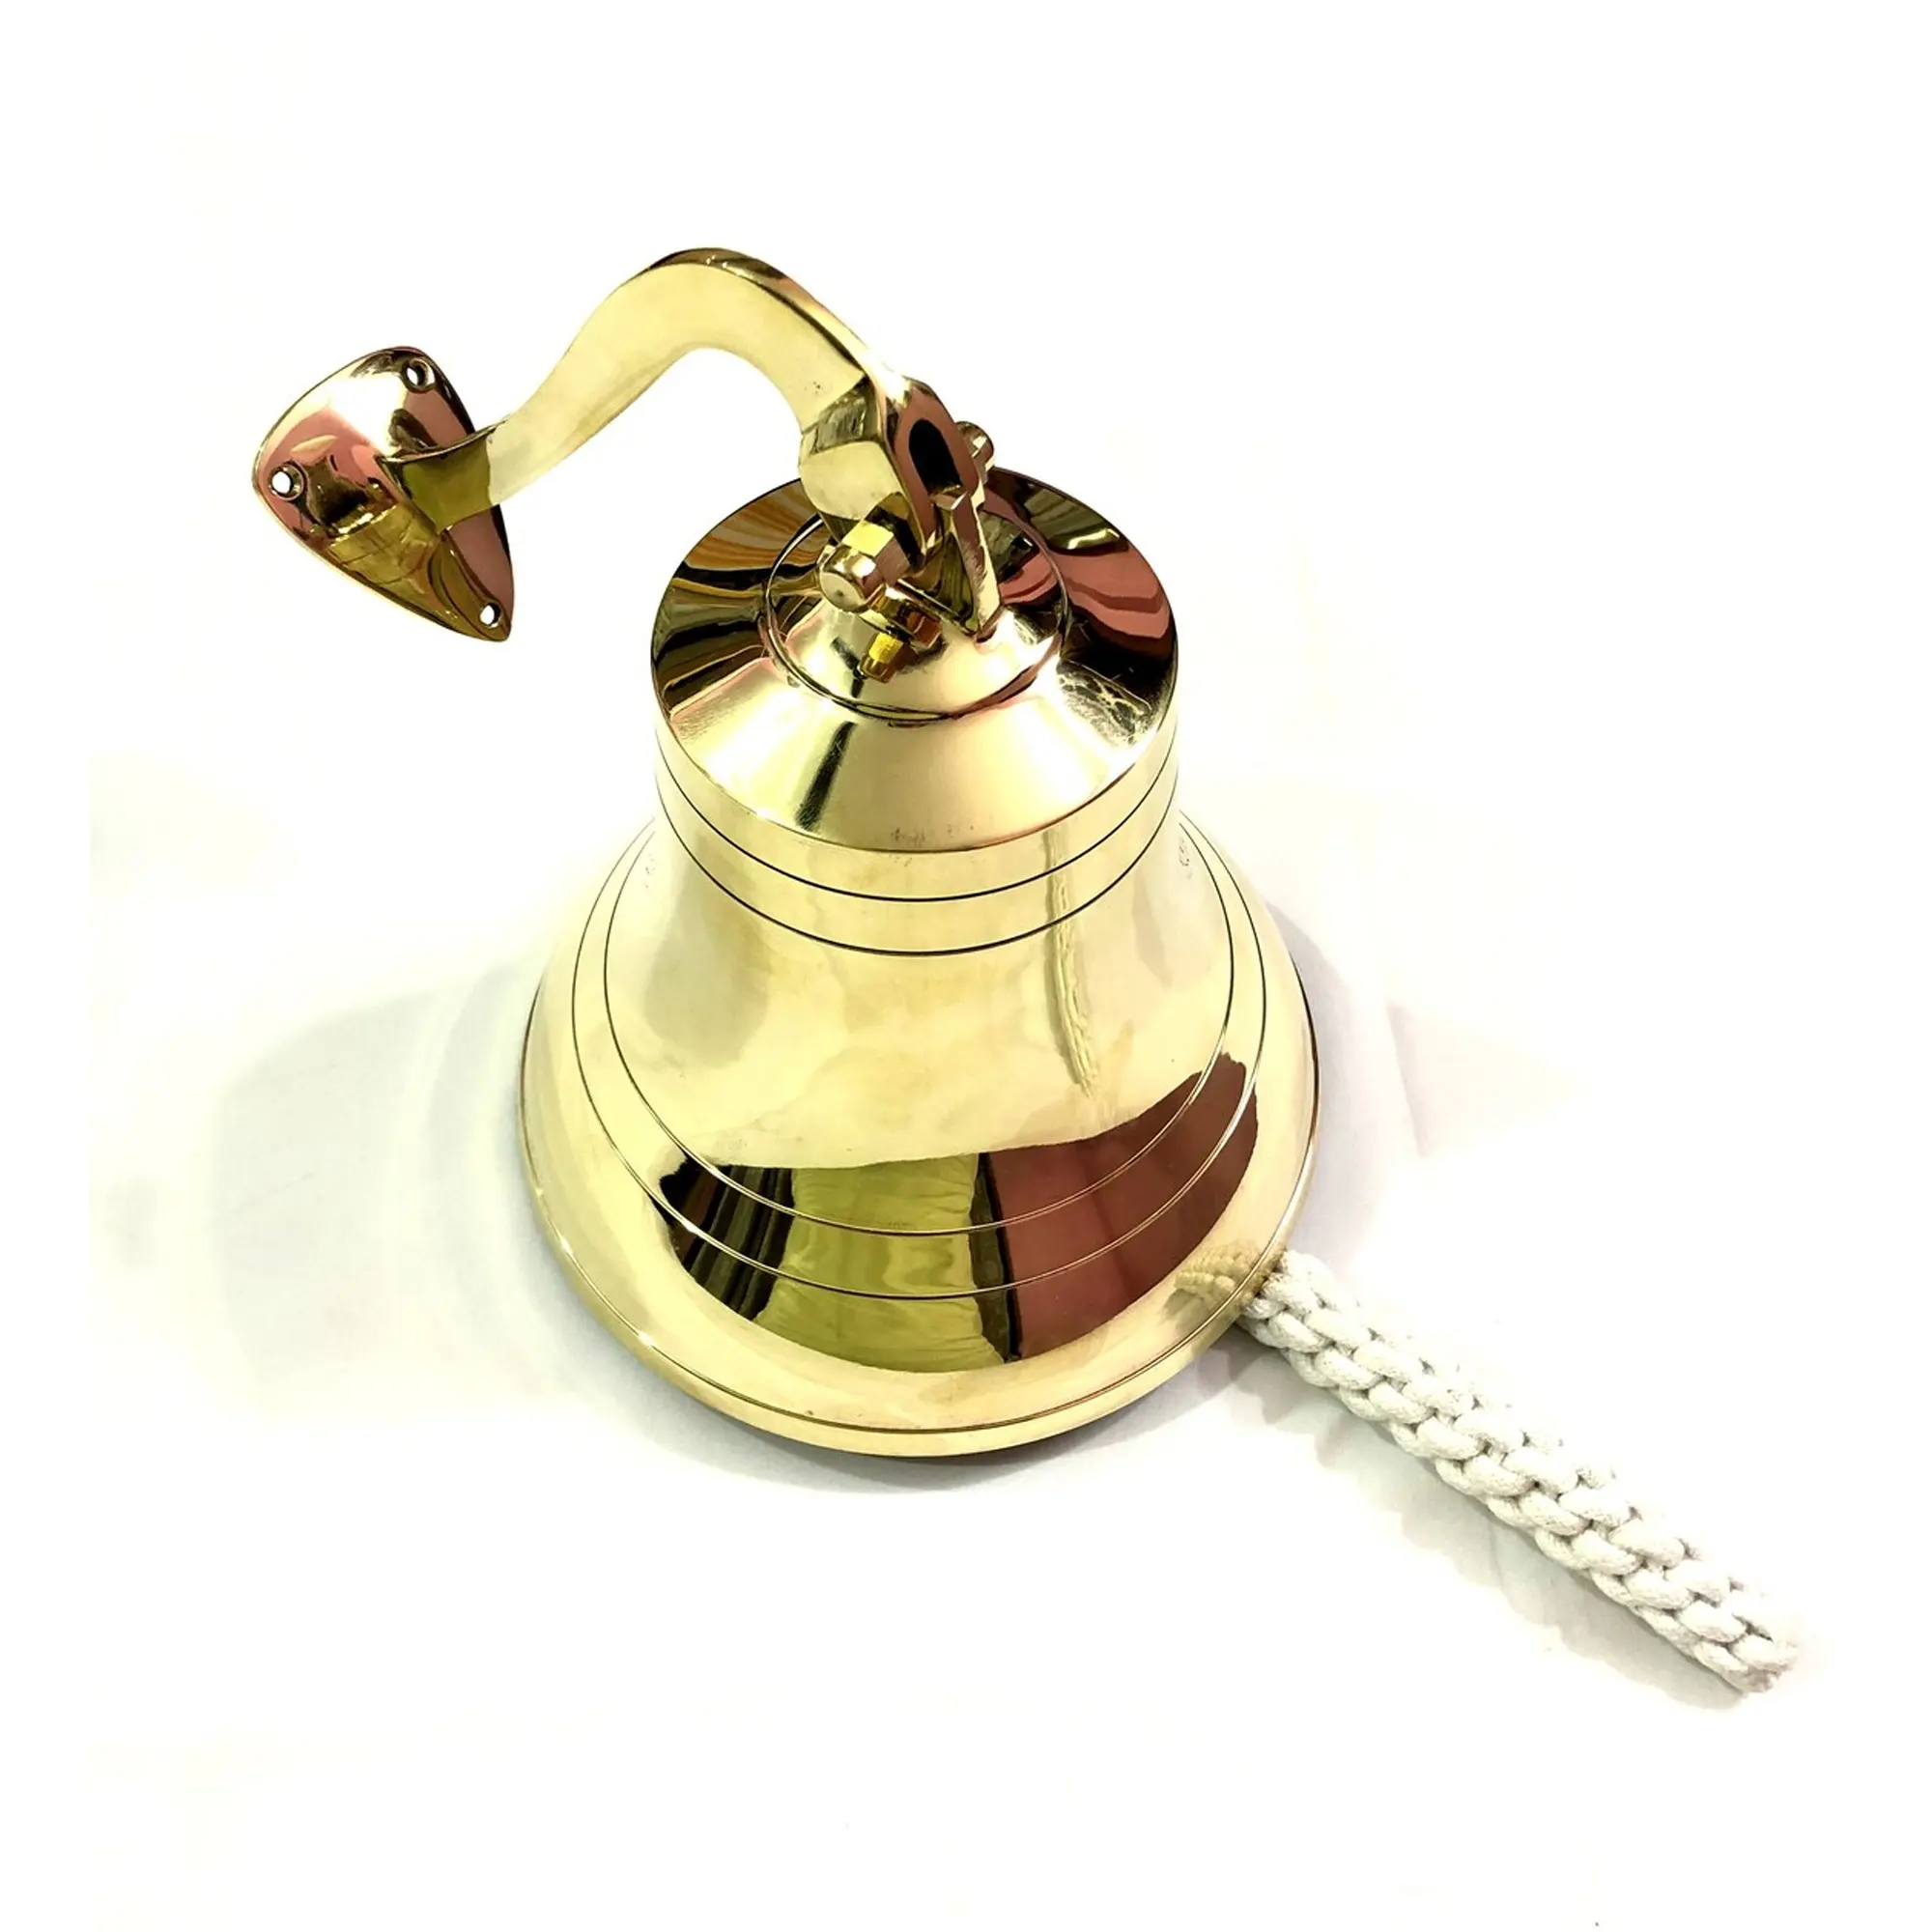 Nautical Shinny Brass Bell Wall Mounted Bracket Maritime Hanging Bell Decor For Gifts